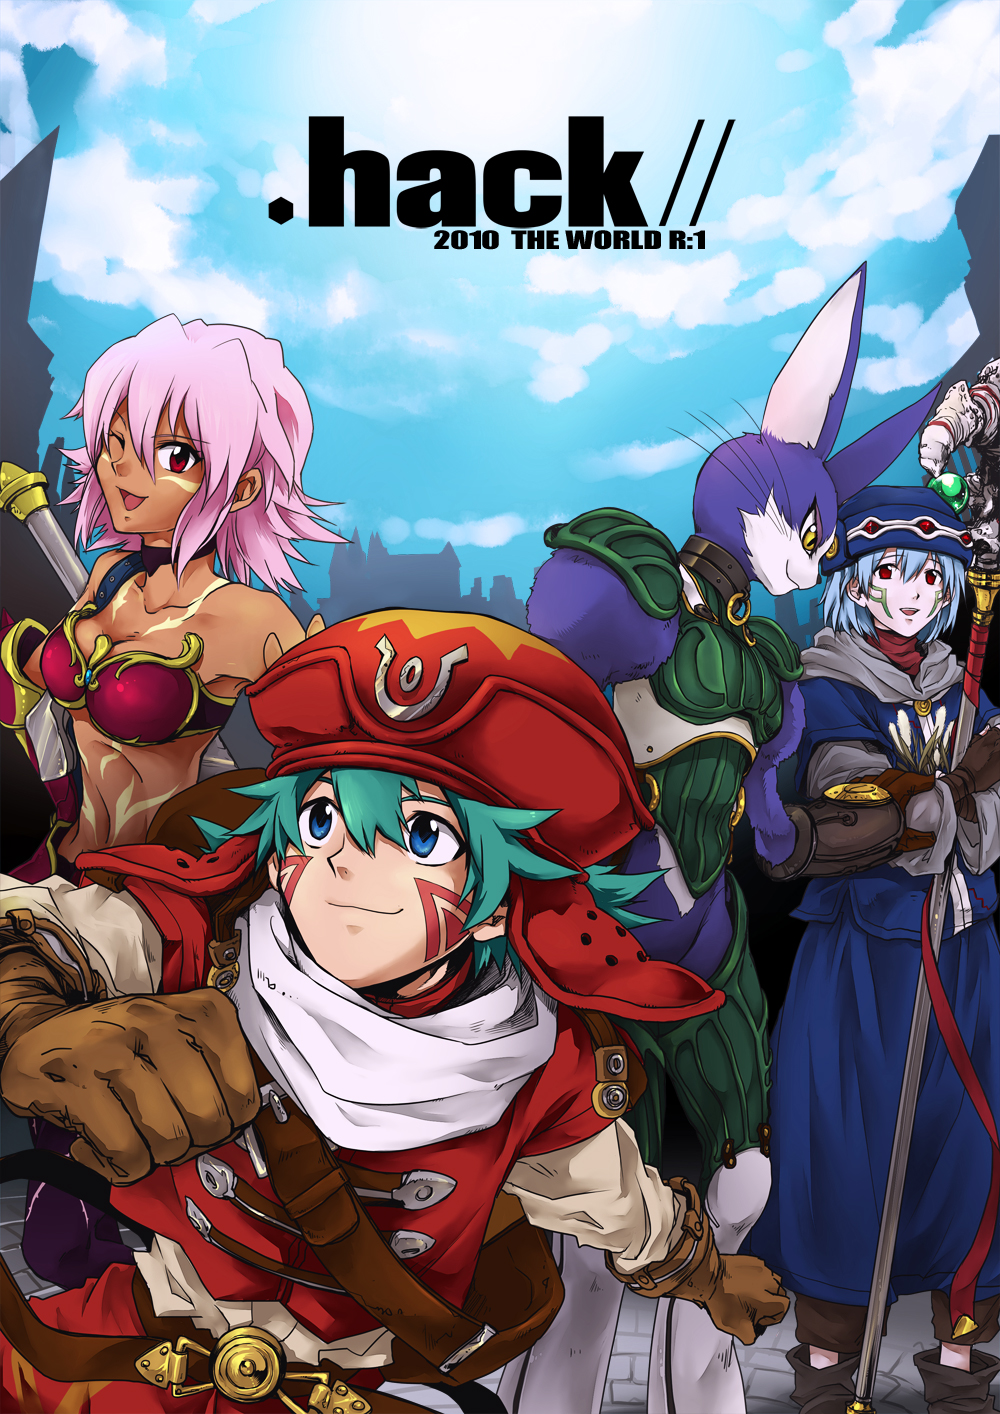 .hack// .hack//games 2boys 2girls air+ animal_ears armor bikini_armor black_rose_(.hack//) blue_eyes blue_hair breasts cleavage closed_mouth dark_skin elk_(.hack//) facial_mark flat_chest furry gloves hat highres holding kite_(.hack//) looking_at_viewer mia_(.hack//) multiple_boys multiple_girls open_mouth red_eyes short_hair smile staff sword tattoo weapon yellow_eyes